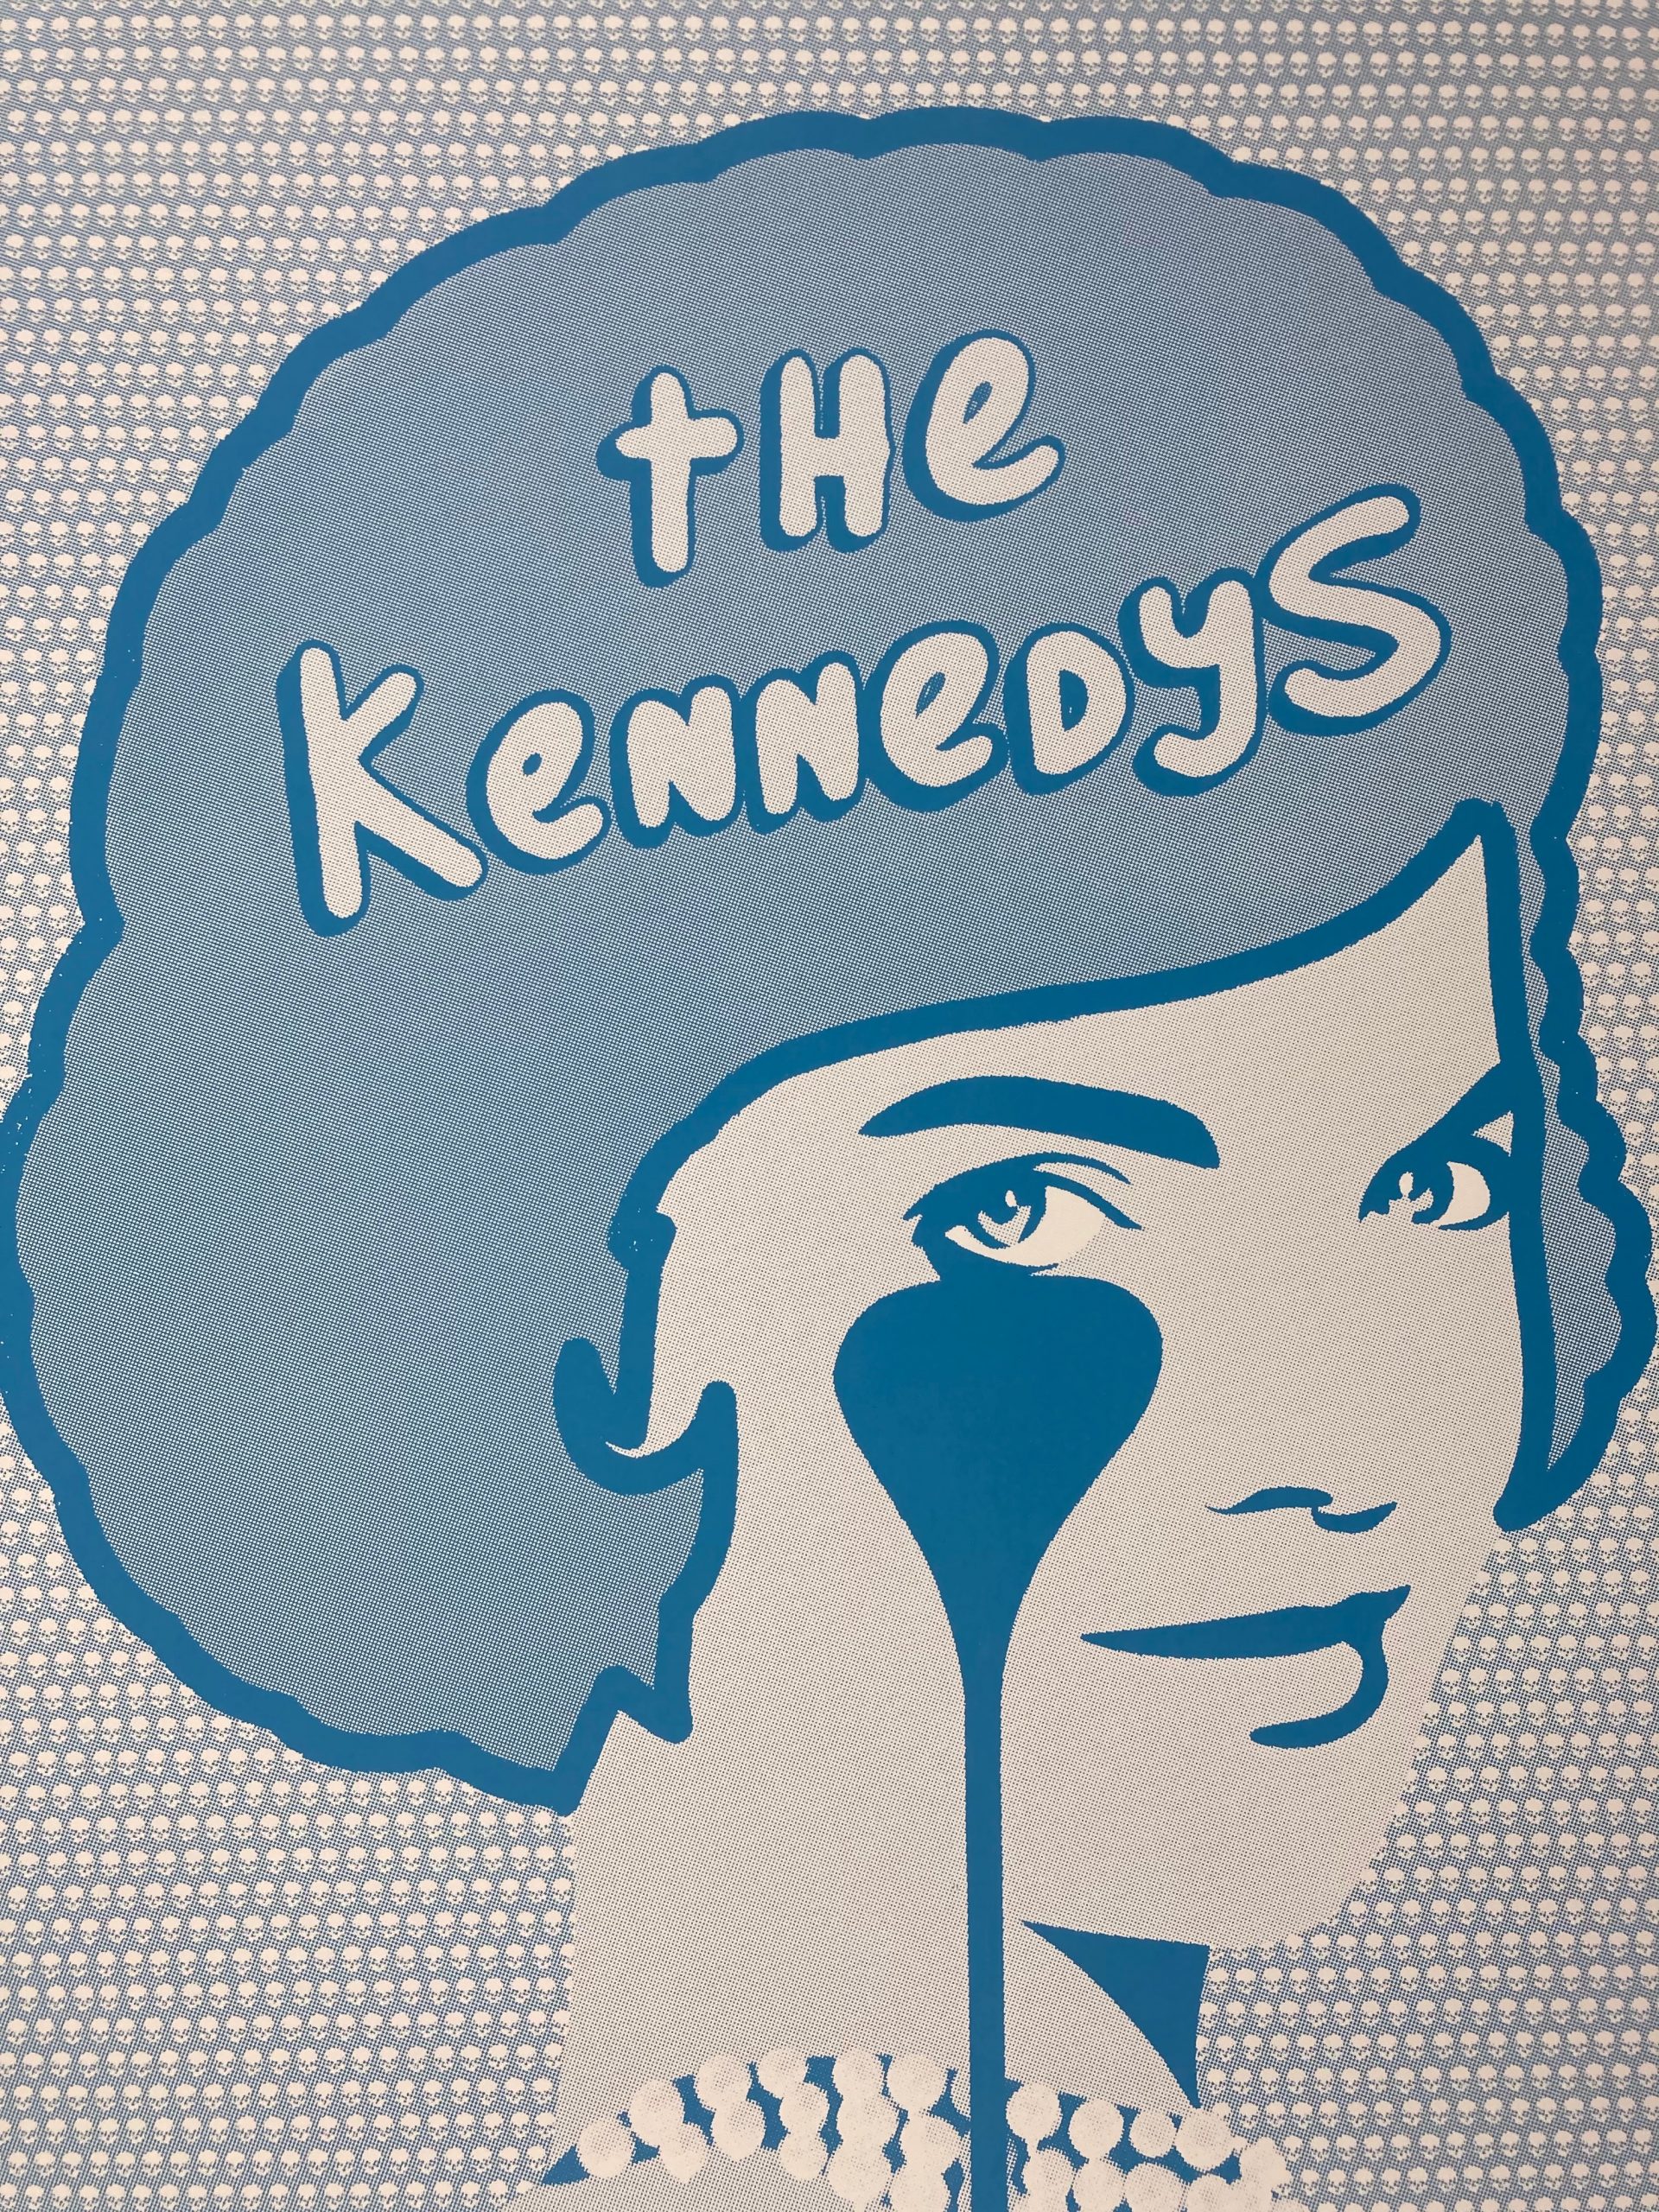 the-kennedys